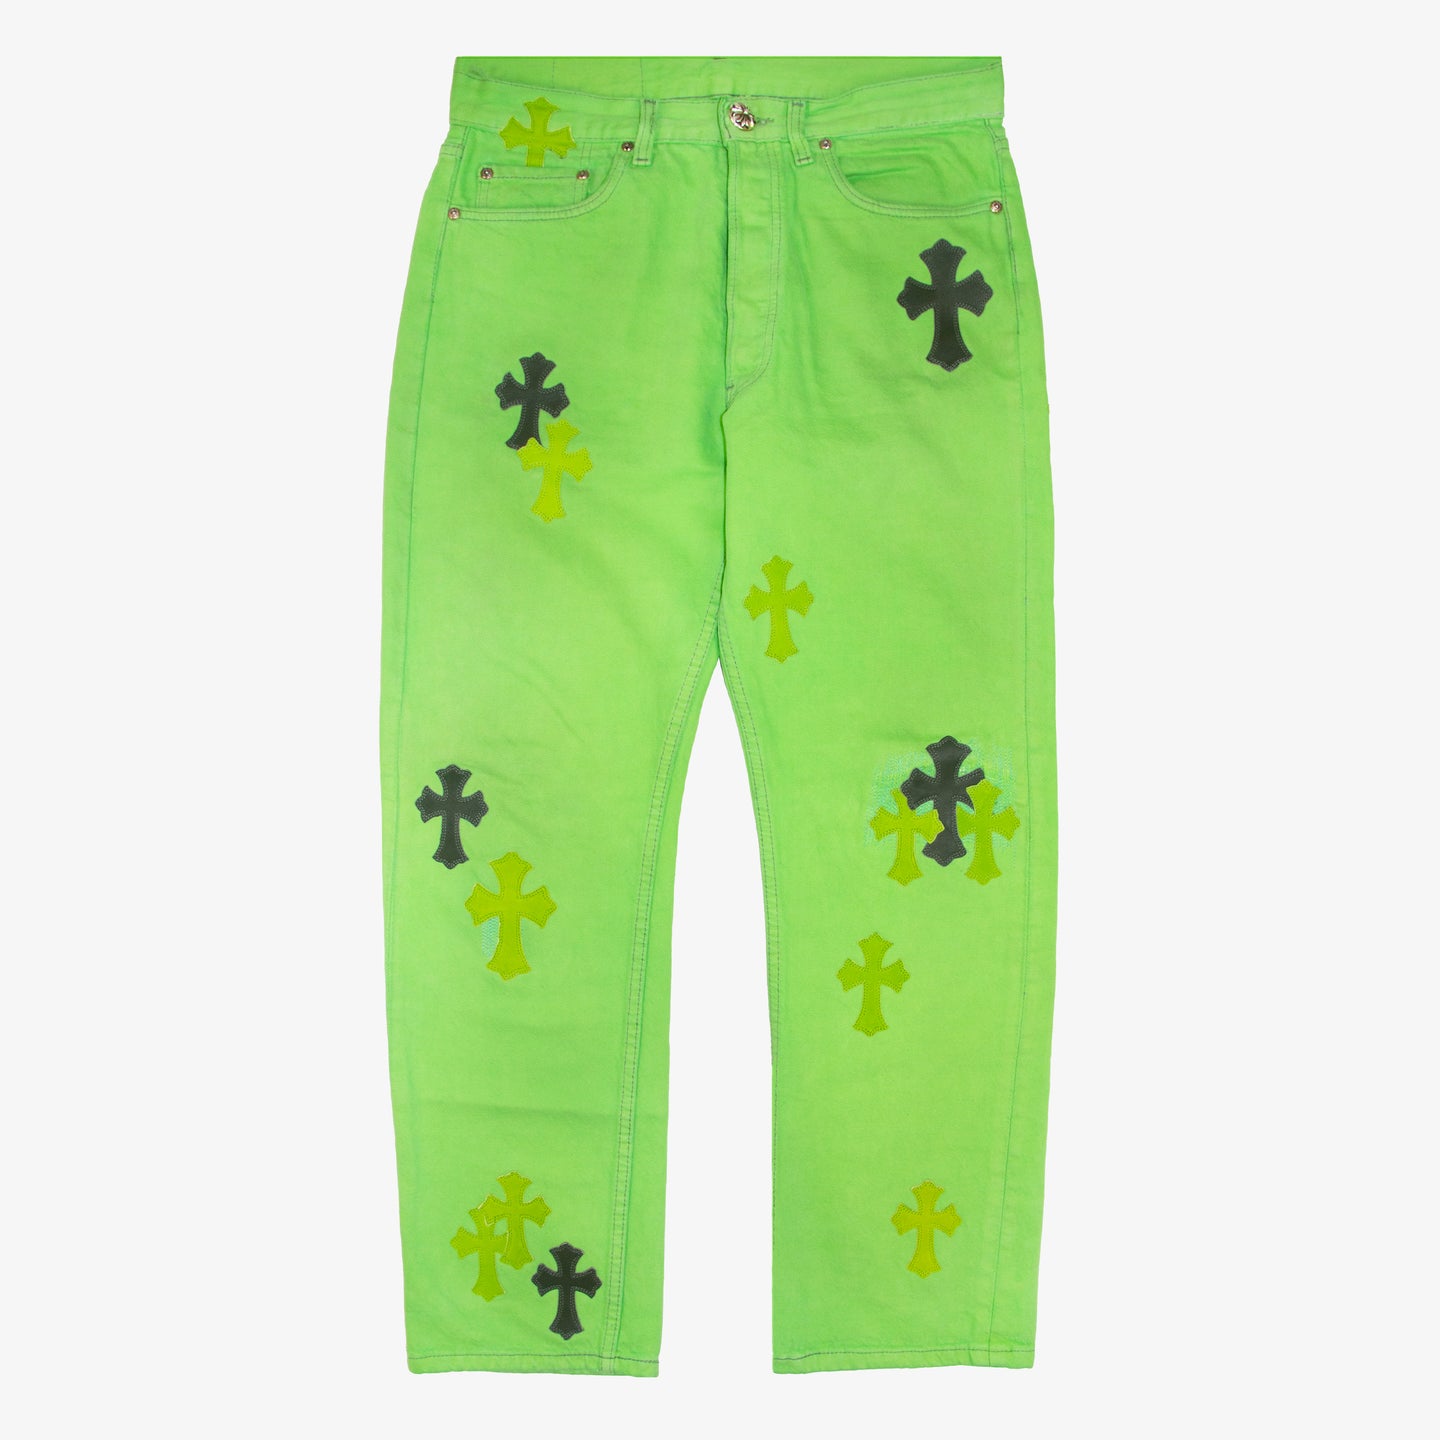 CHROME HEARTS SEX RECORDS SLIME GREEN PATCH DENIM